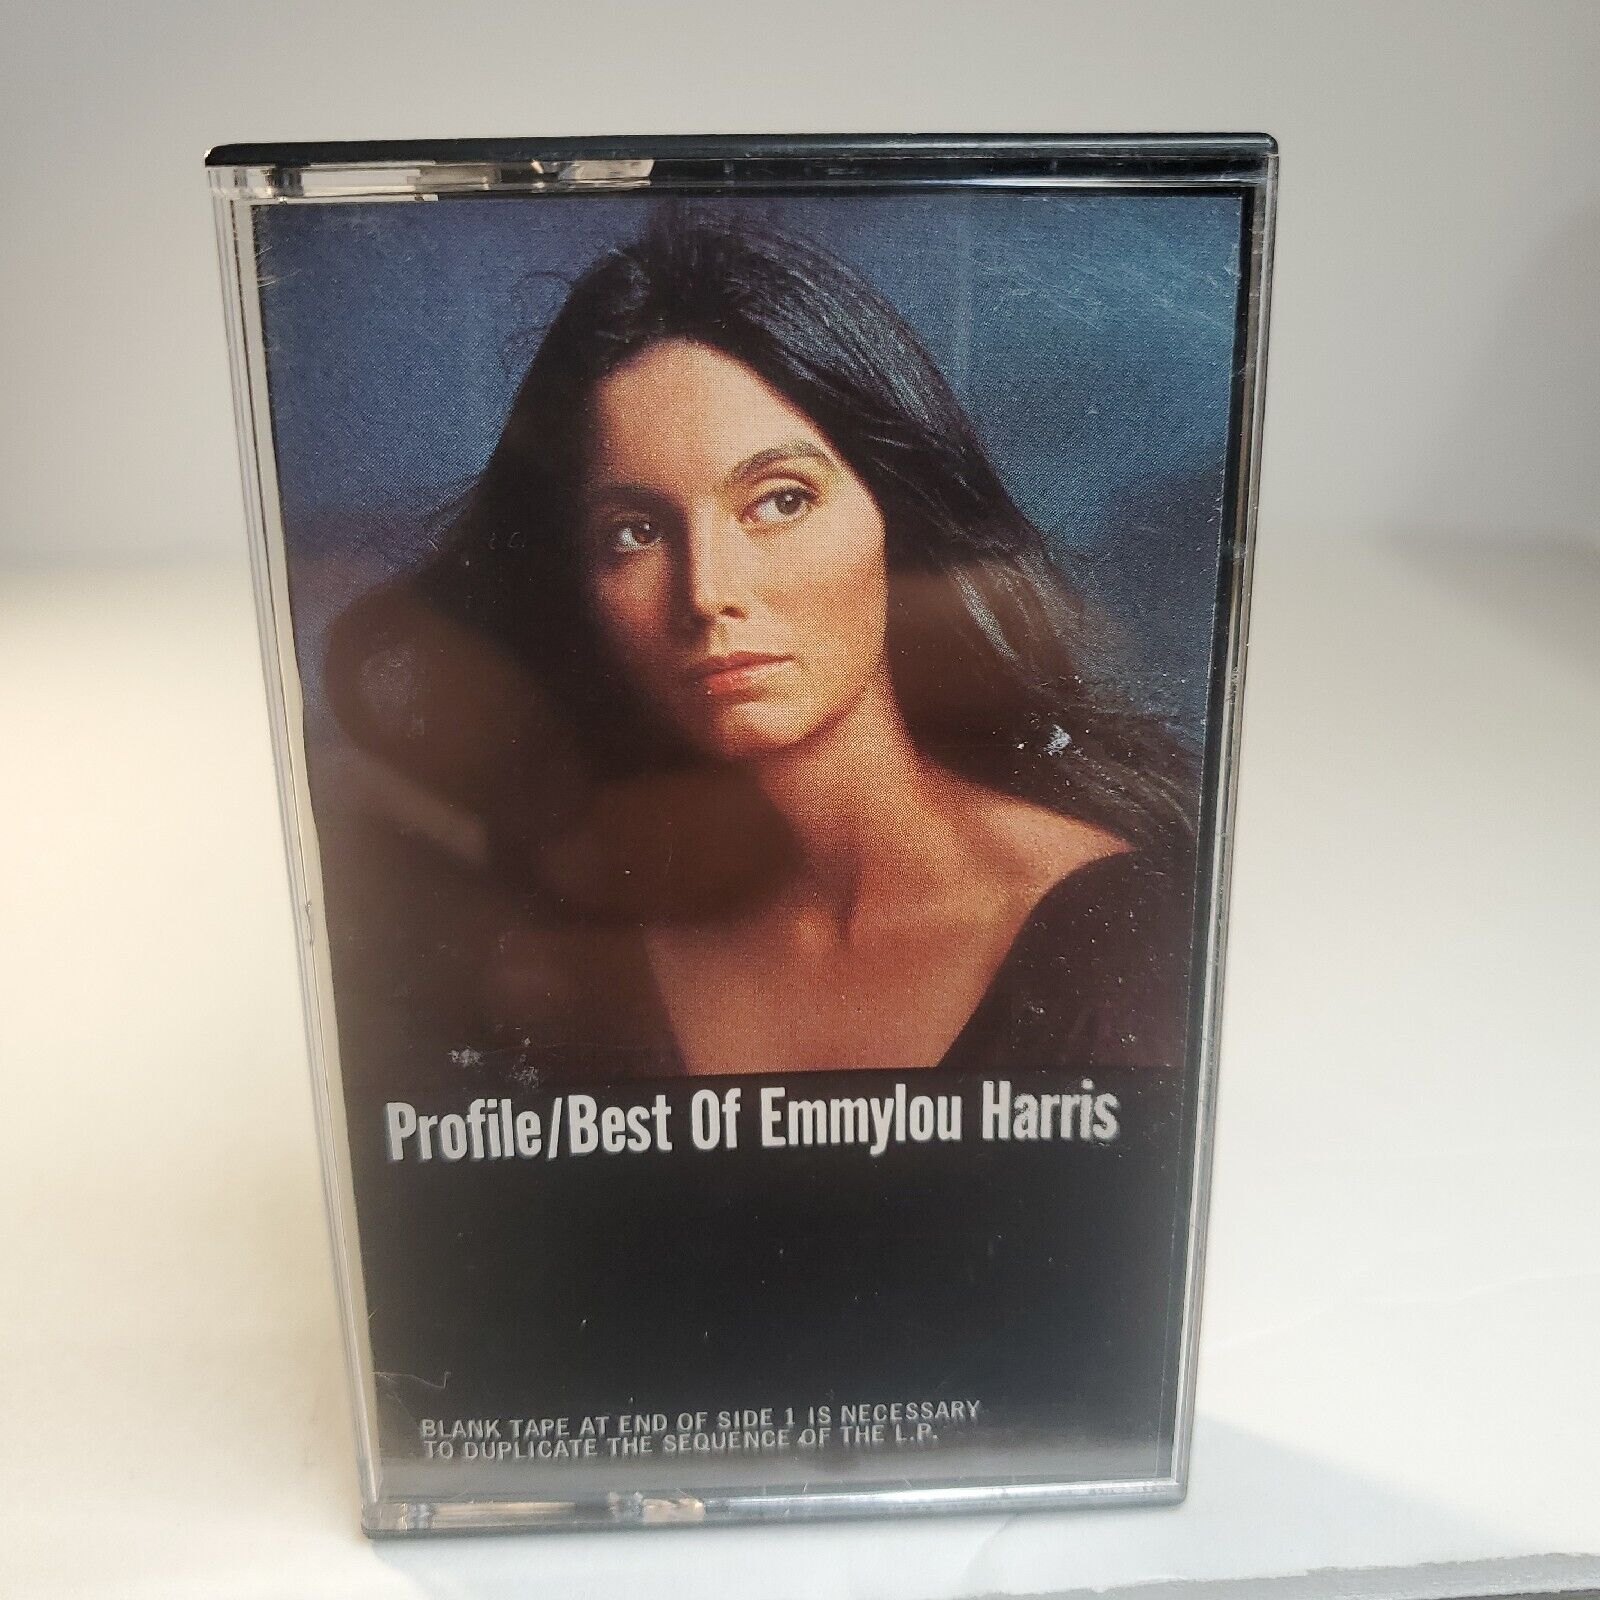 Profile / Best of Emmylou Harris - Cassette Tape - Country Music ~~~ TESTED